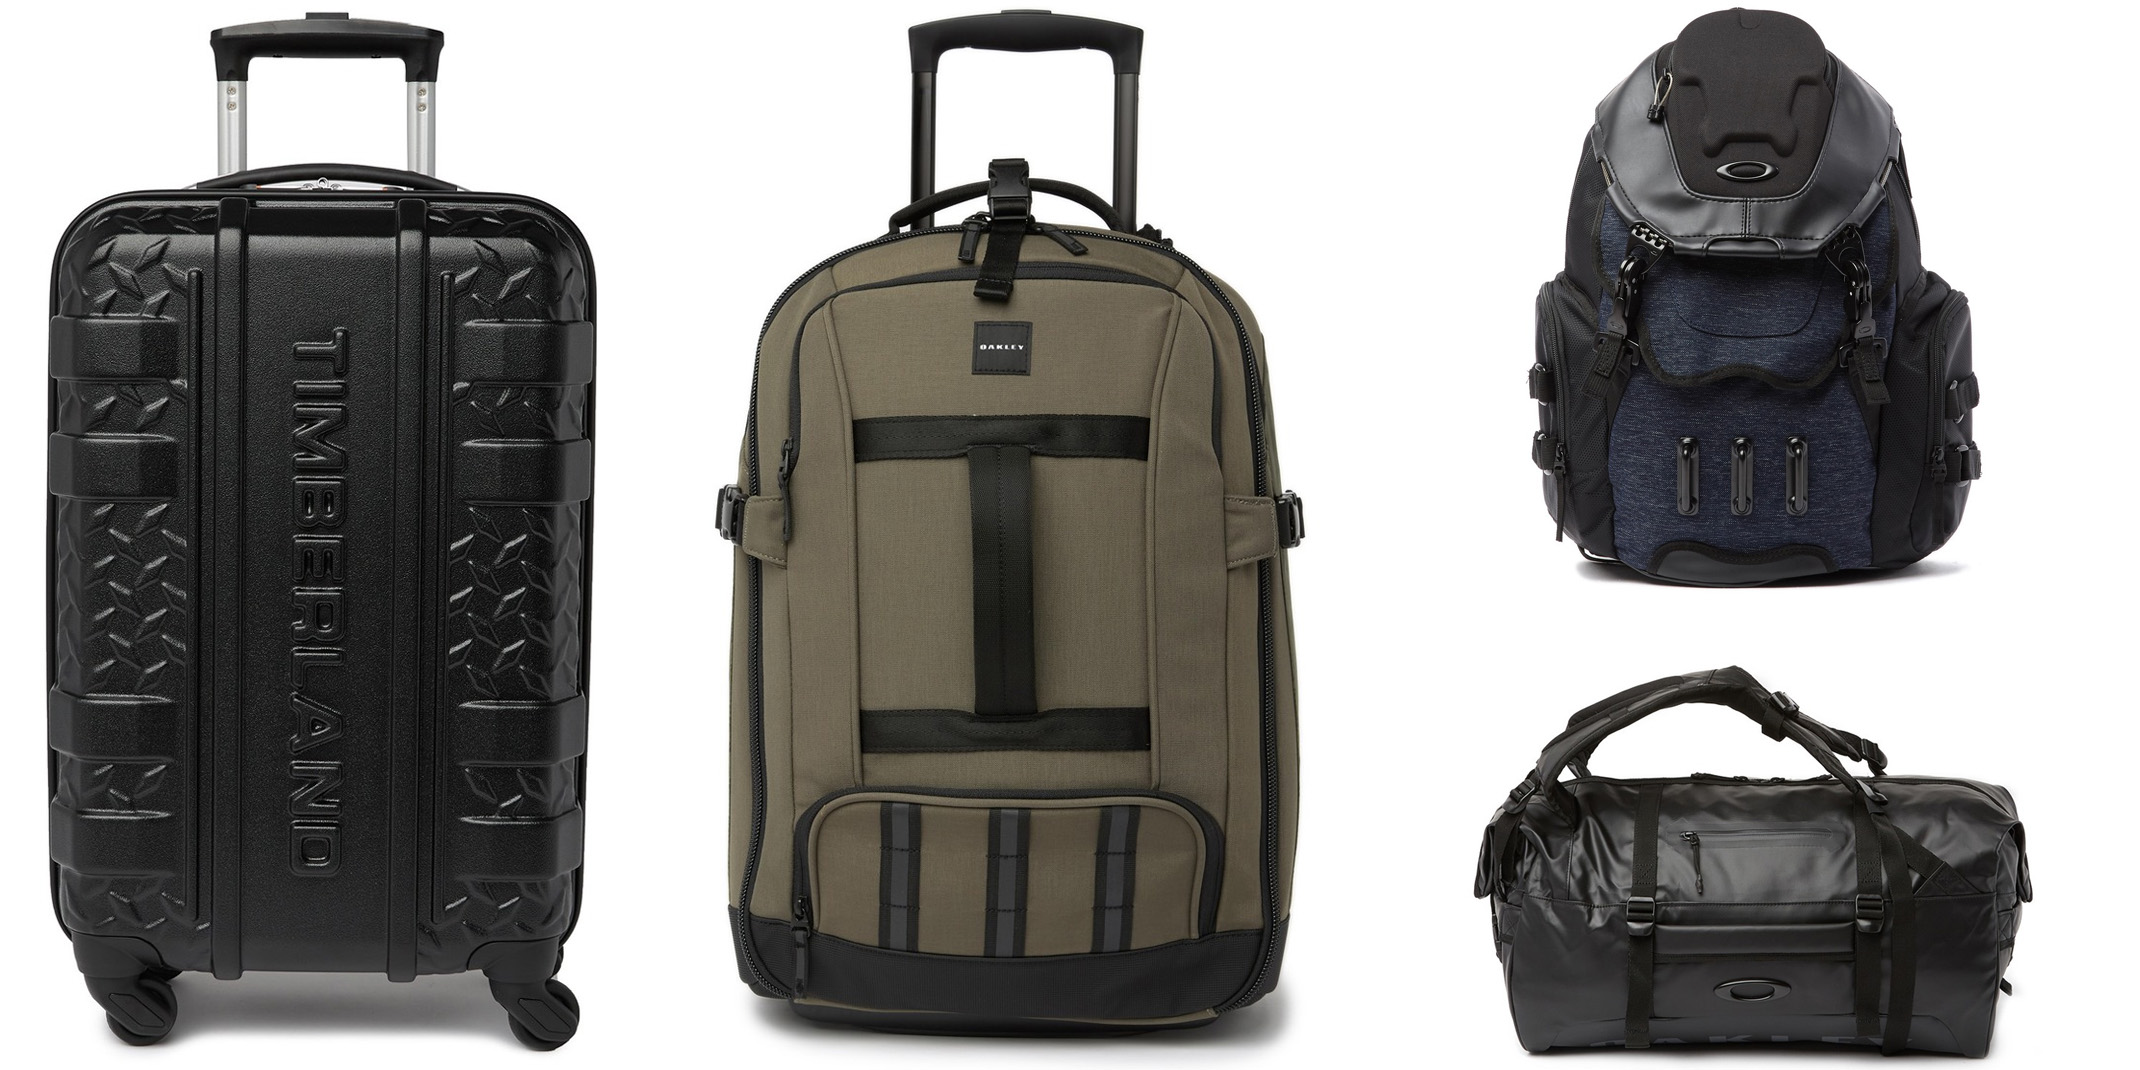 Oakley luggage, backpacks & accessories from $15 during Hautelook's Luggage  Sale